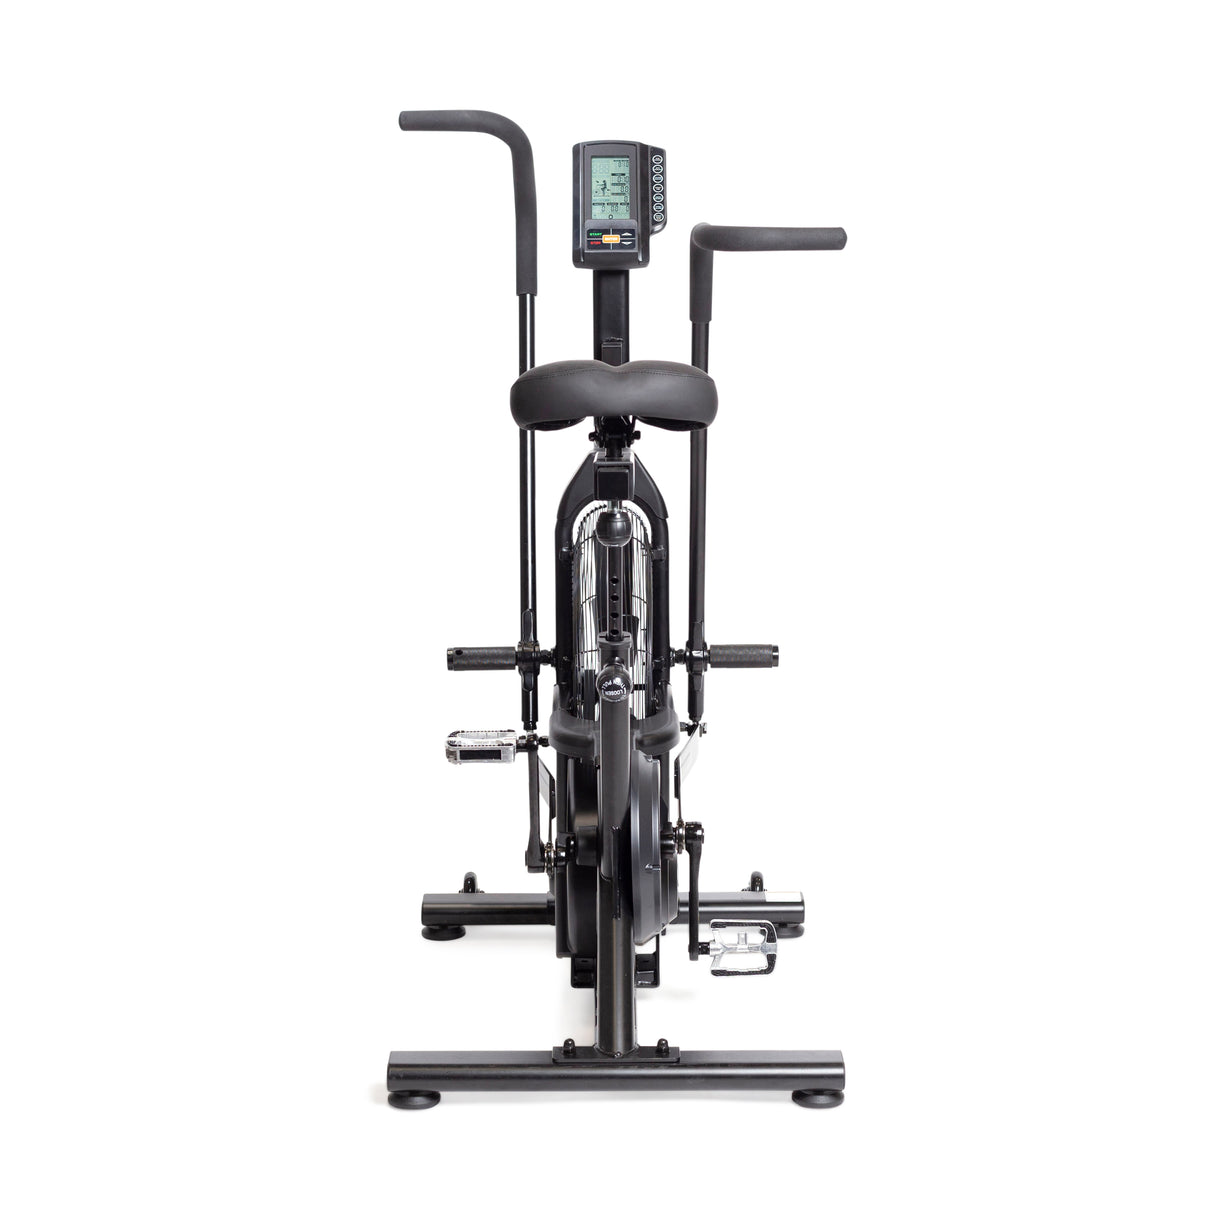 A sleek black Residential Air Bike with adjustable seat and handlebars, perfect for home workouts